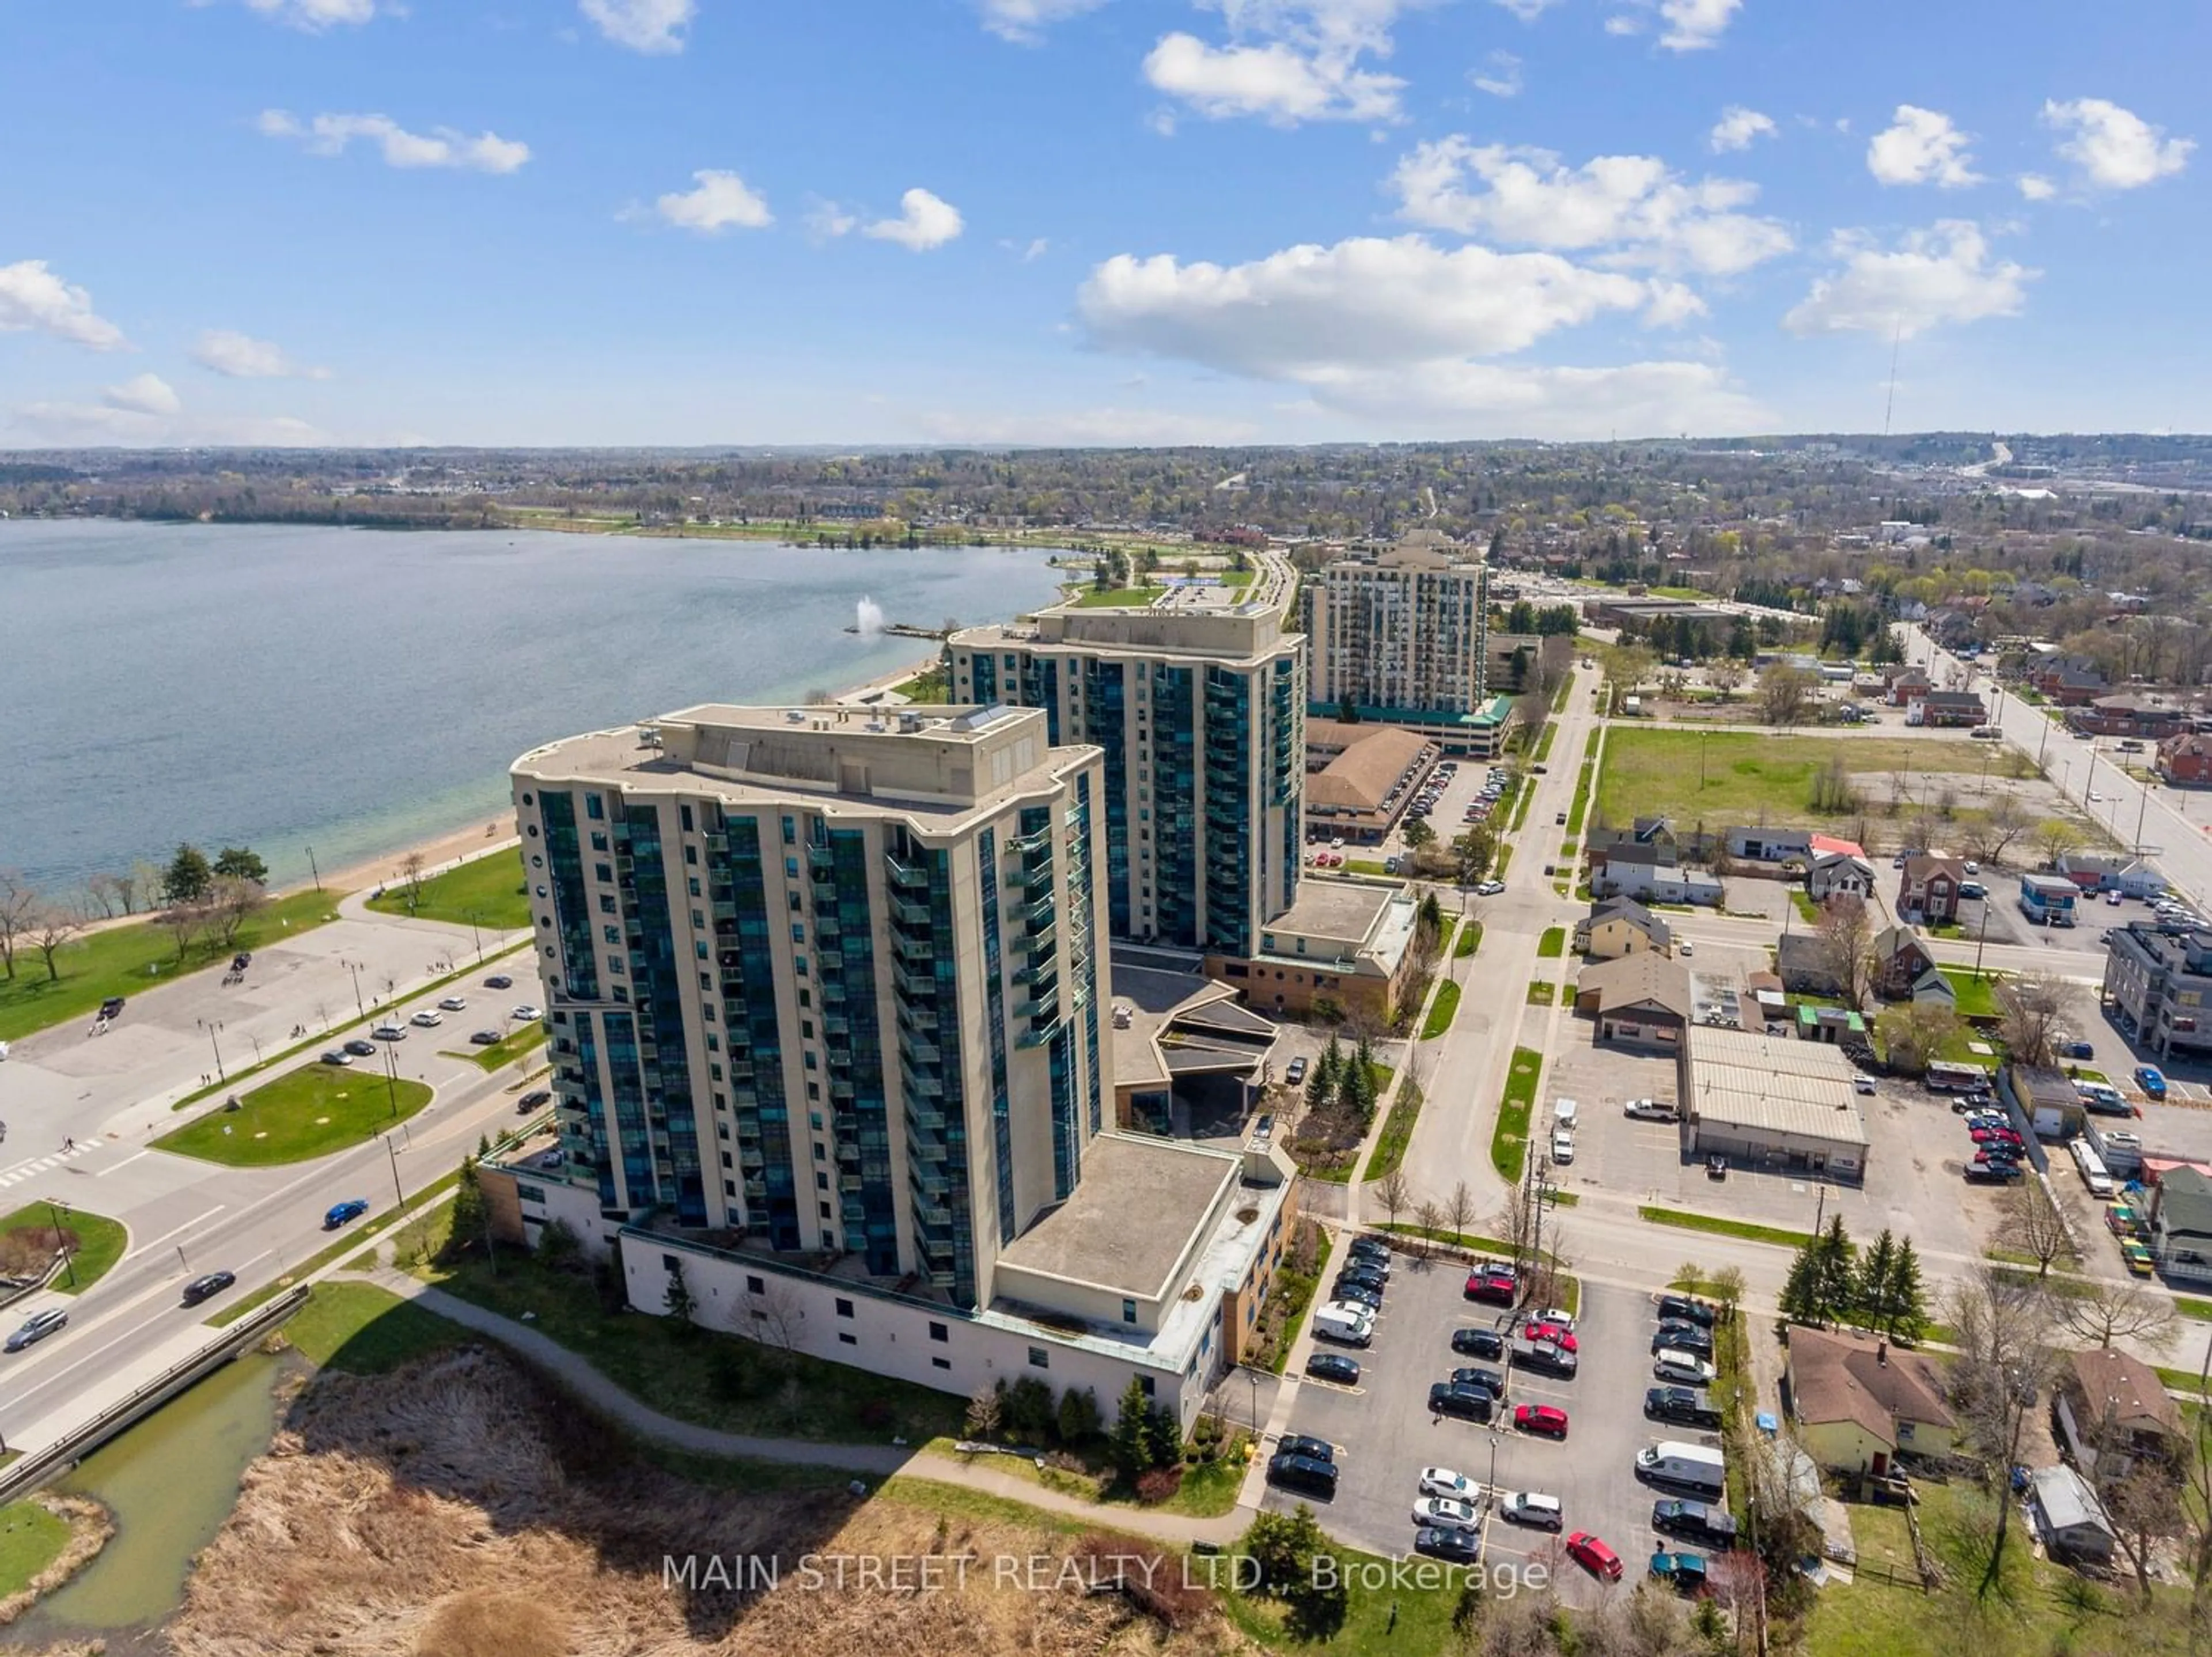 Lakeview for 37 Ellen St #406, Barrie Ontario L4N 6G2